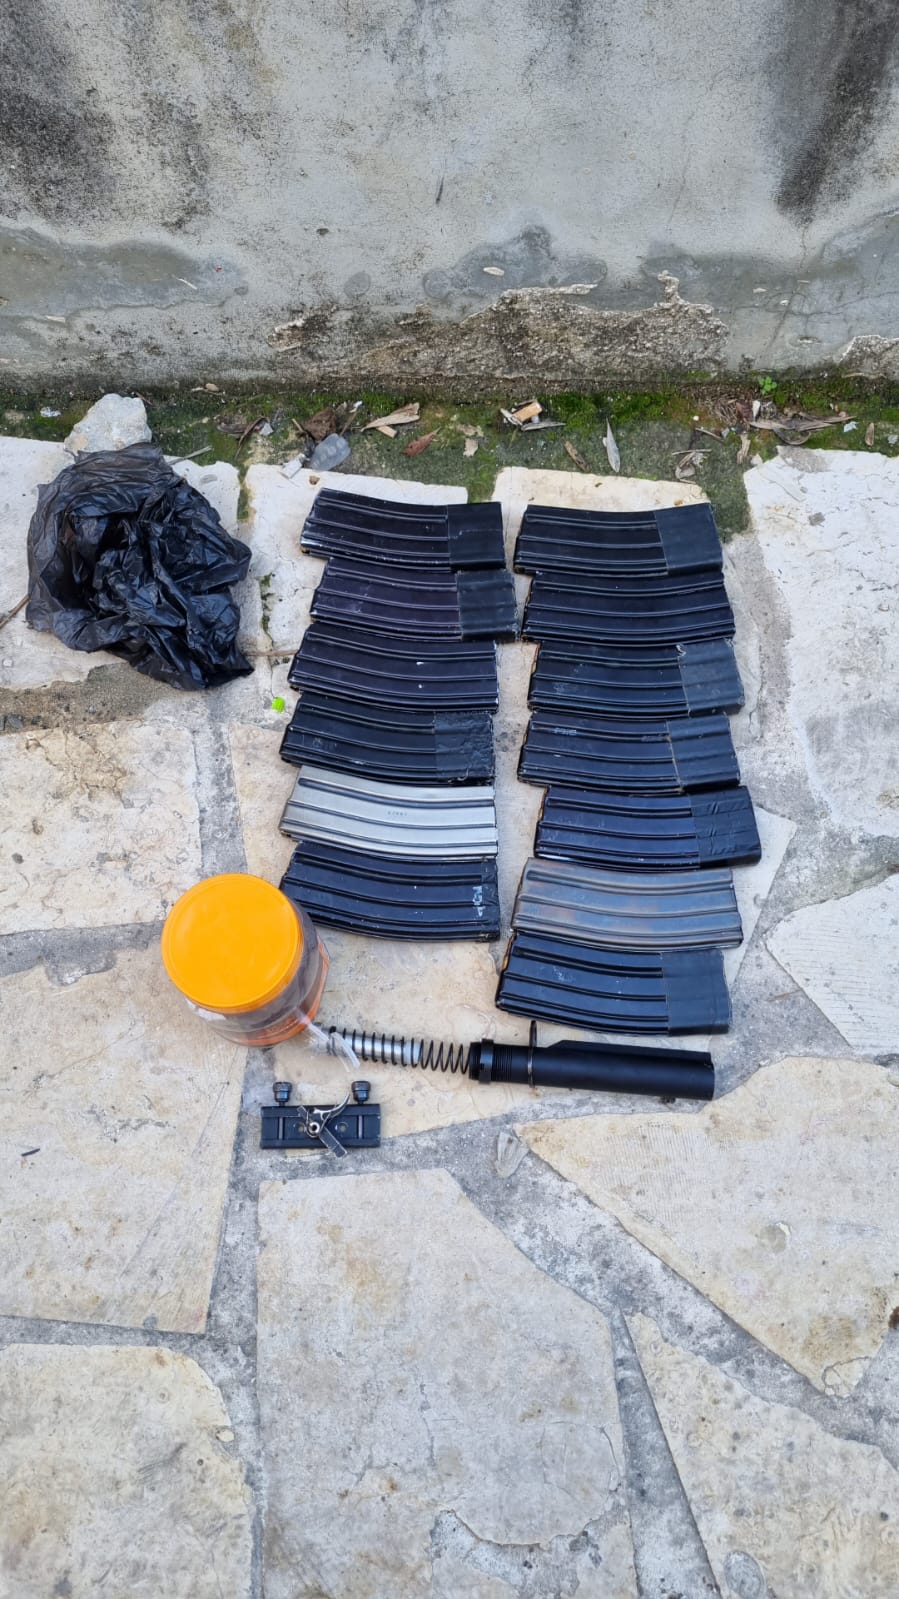 Weapons found in a counter-terrorism marker in the Tulkarm refugee camp (photo: IDF spokesperson)